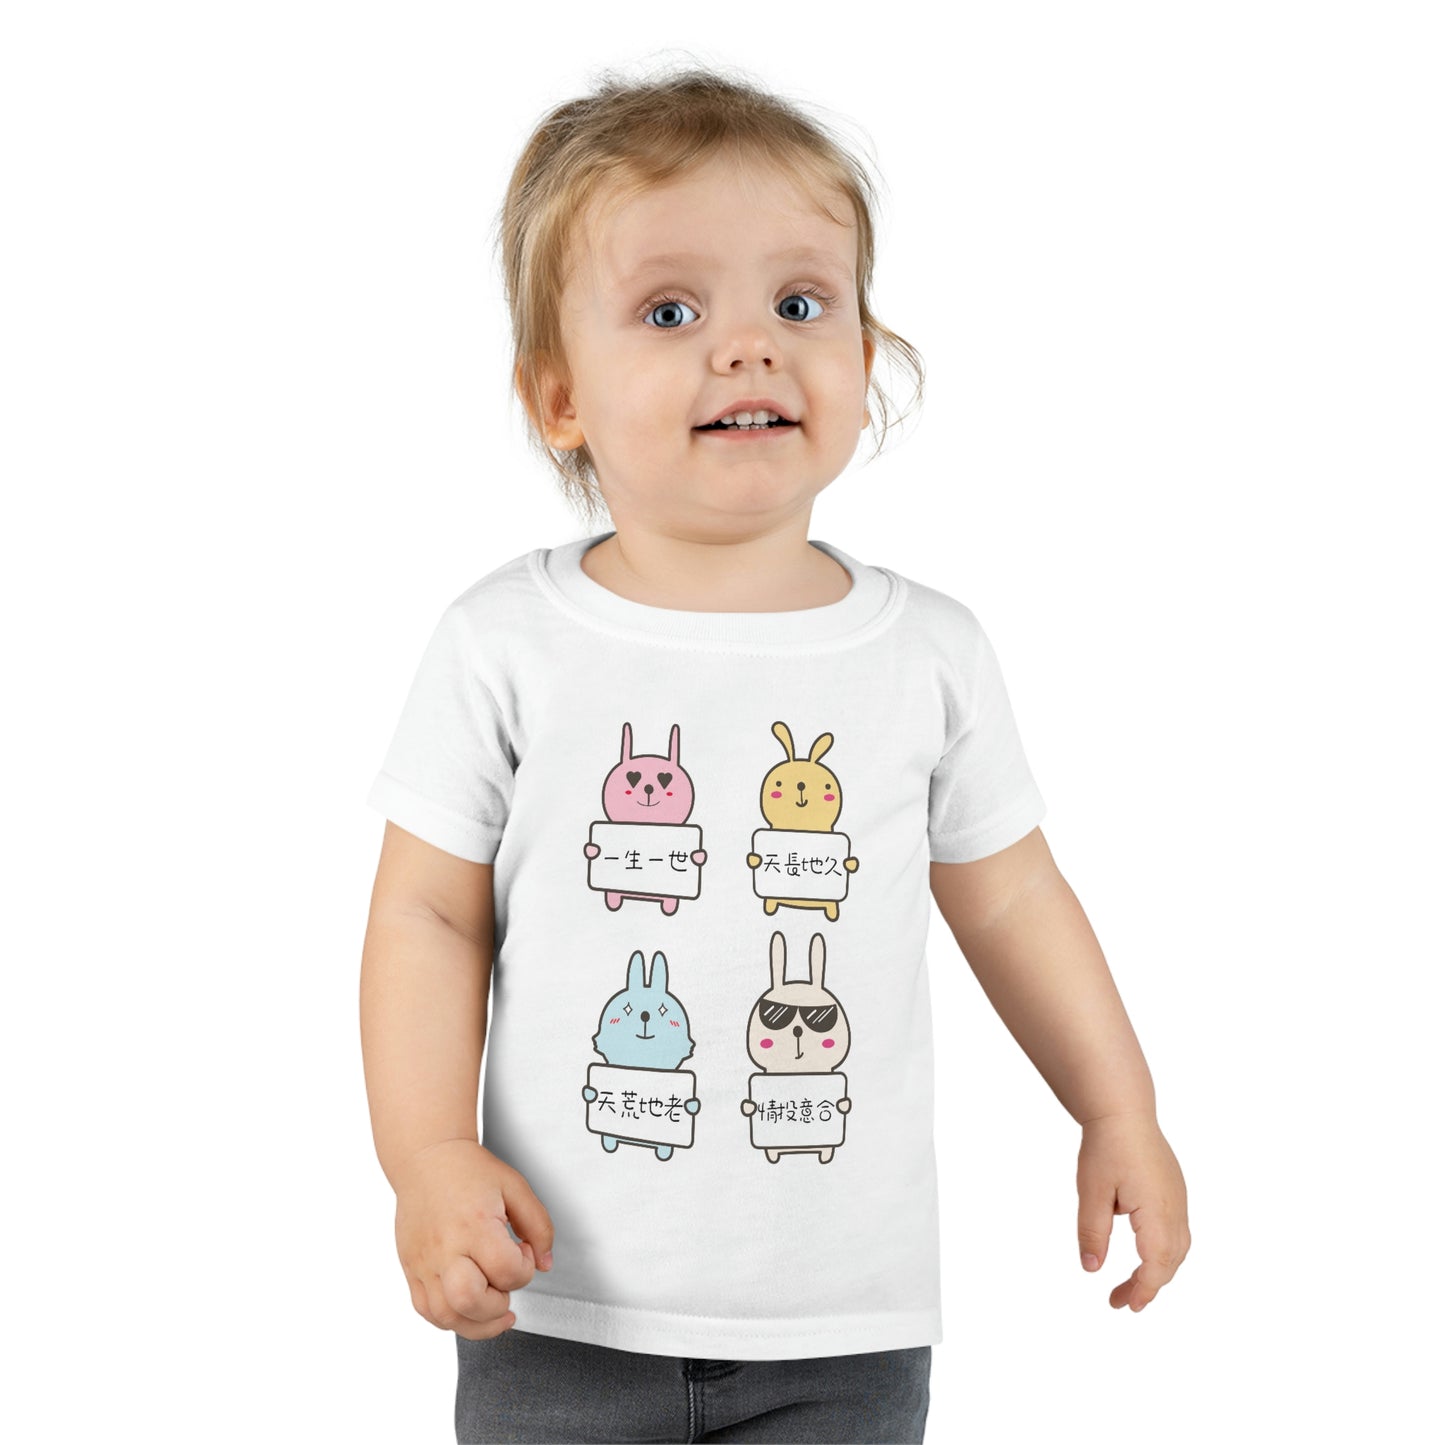 Toddler Forever Love Bunnies,  永遠愛你兔兔！T-shirts